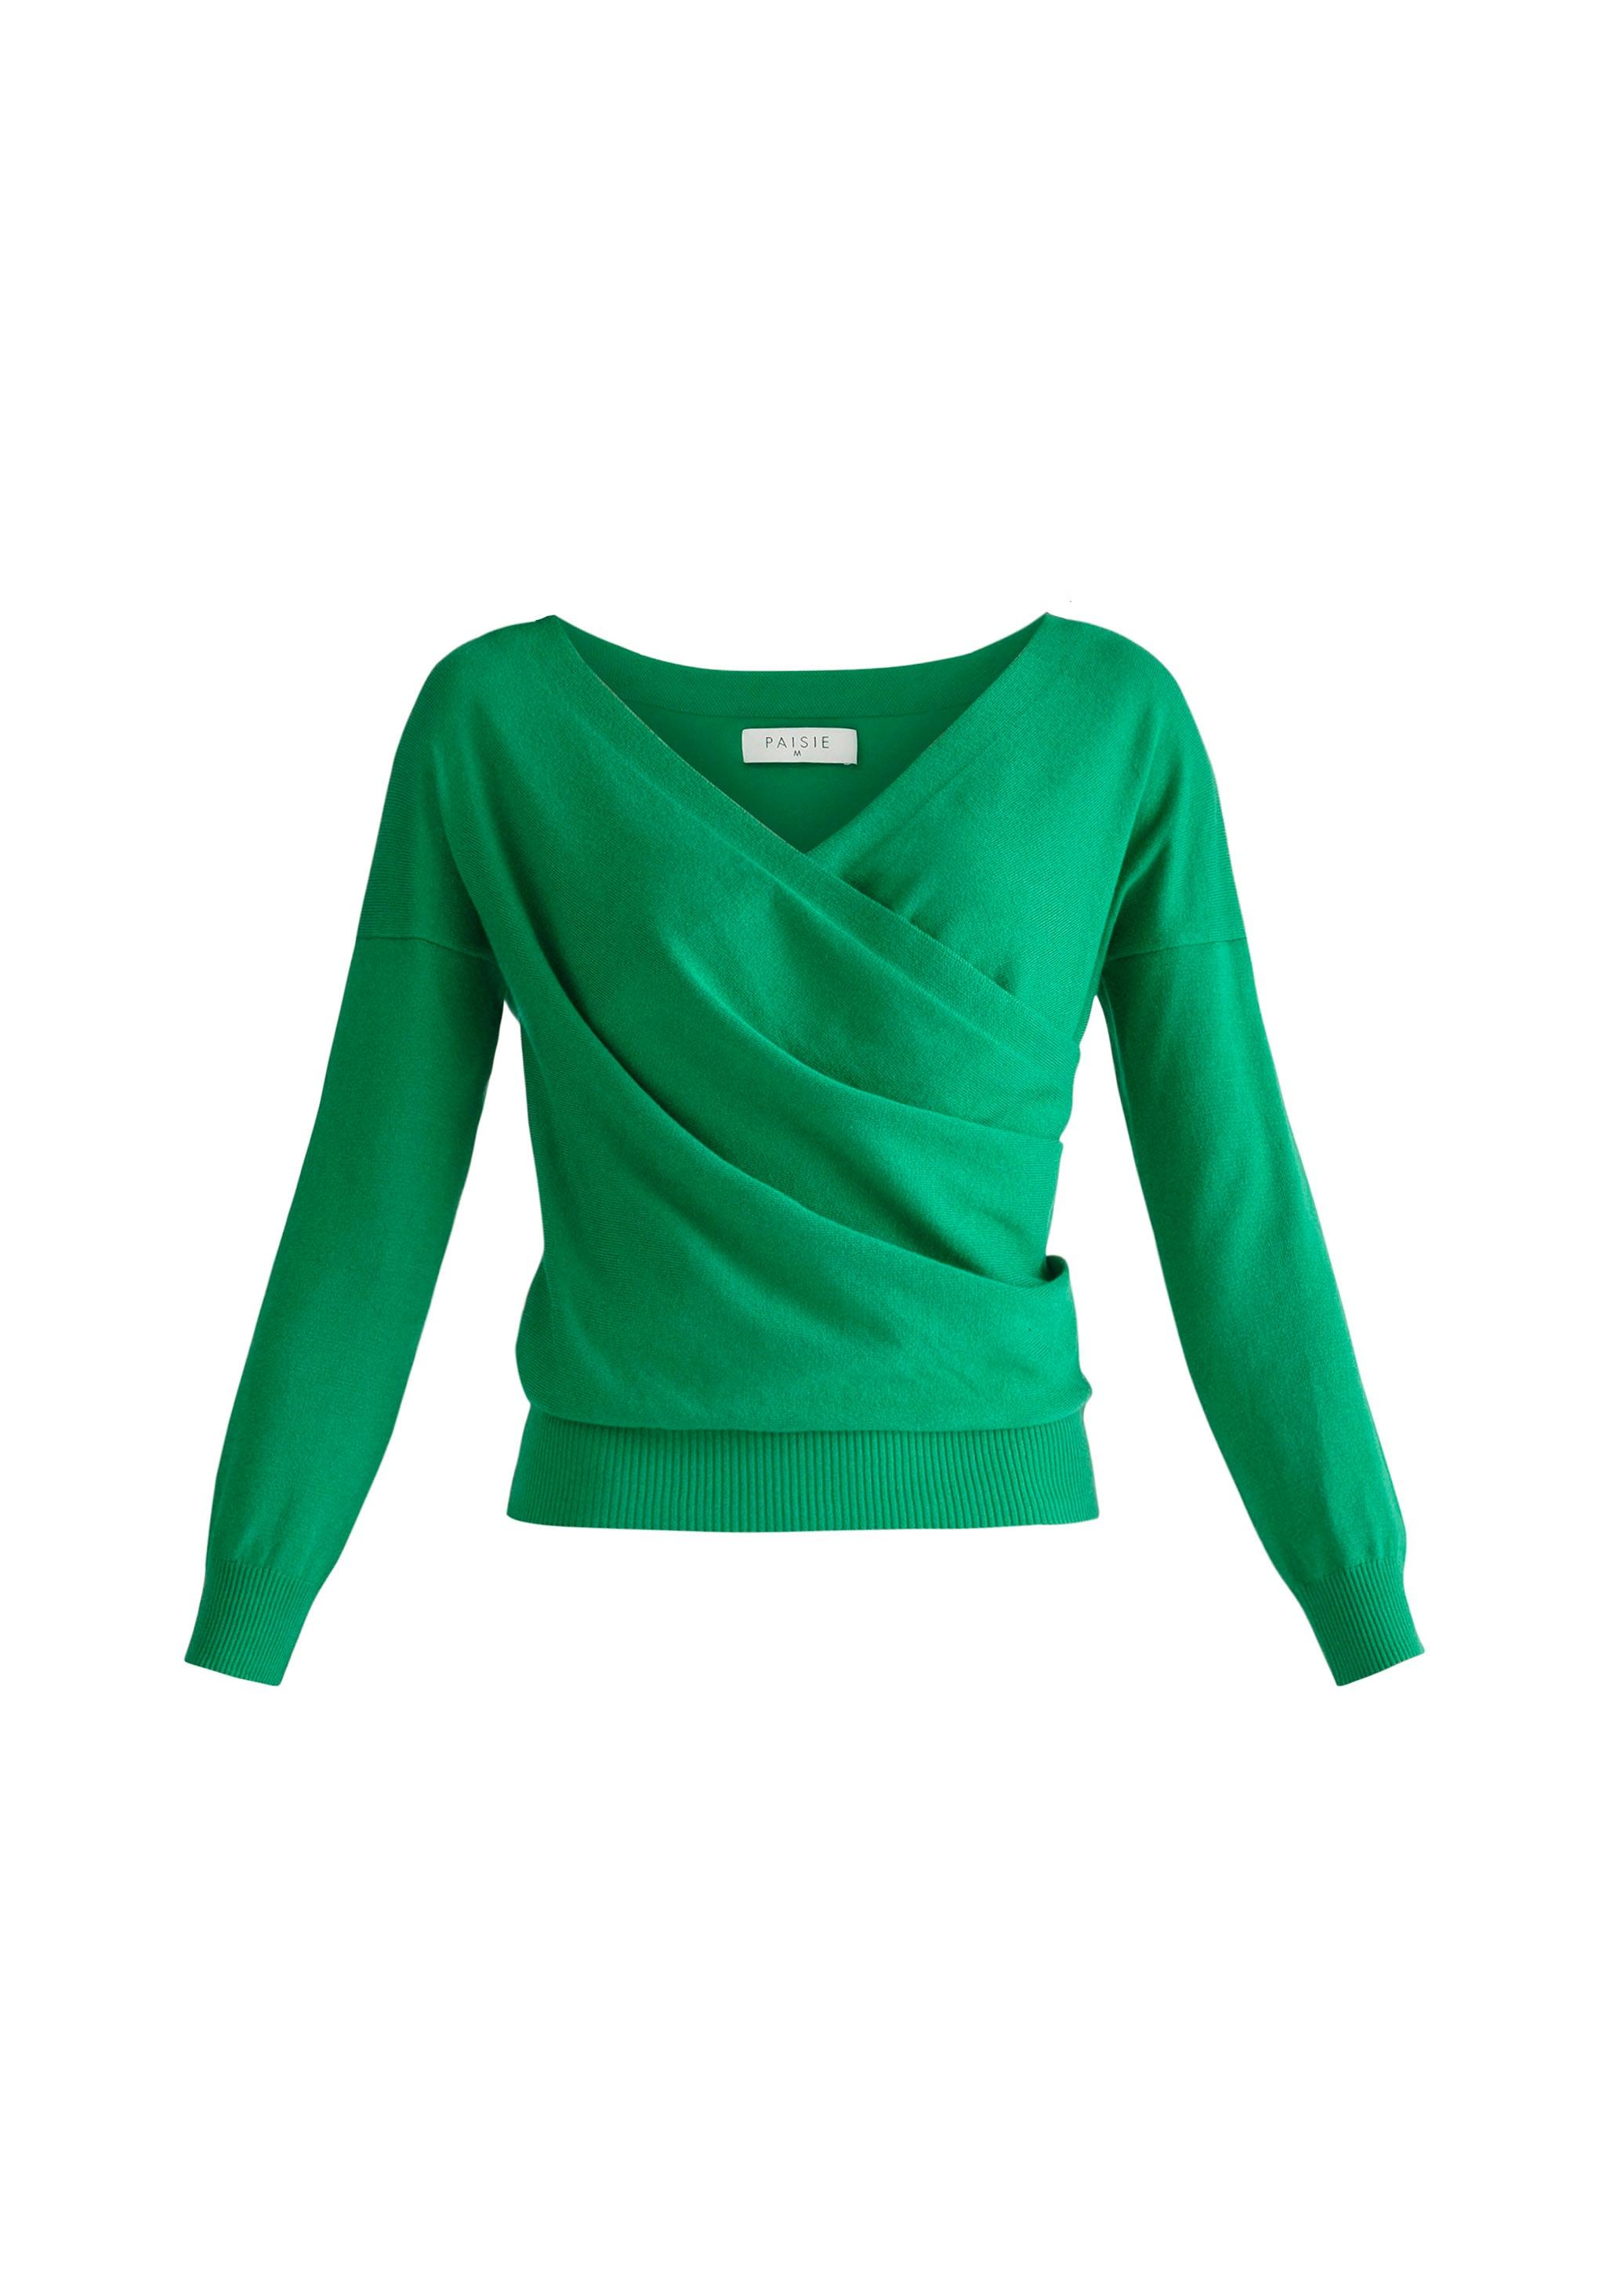 Paisie Knitted Wrap Top With Long Sleeves in Green | Lyst